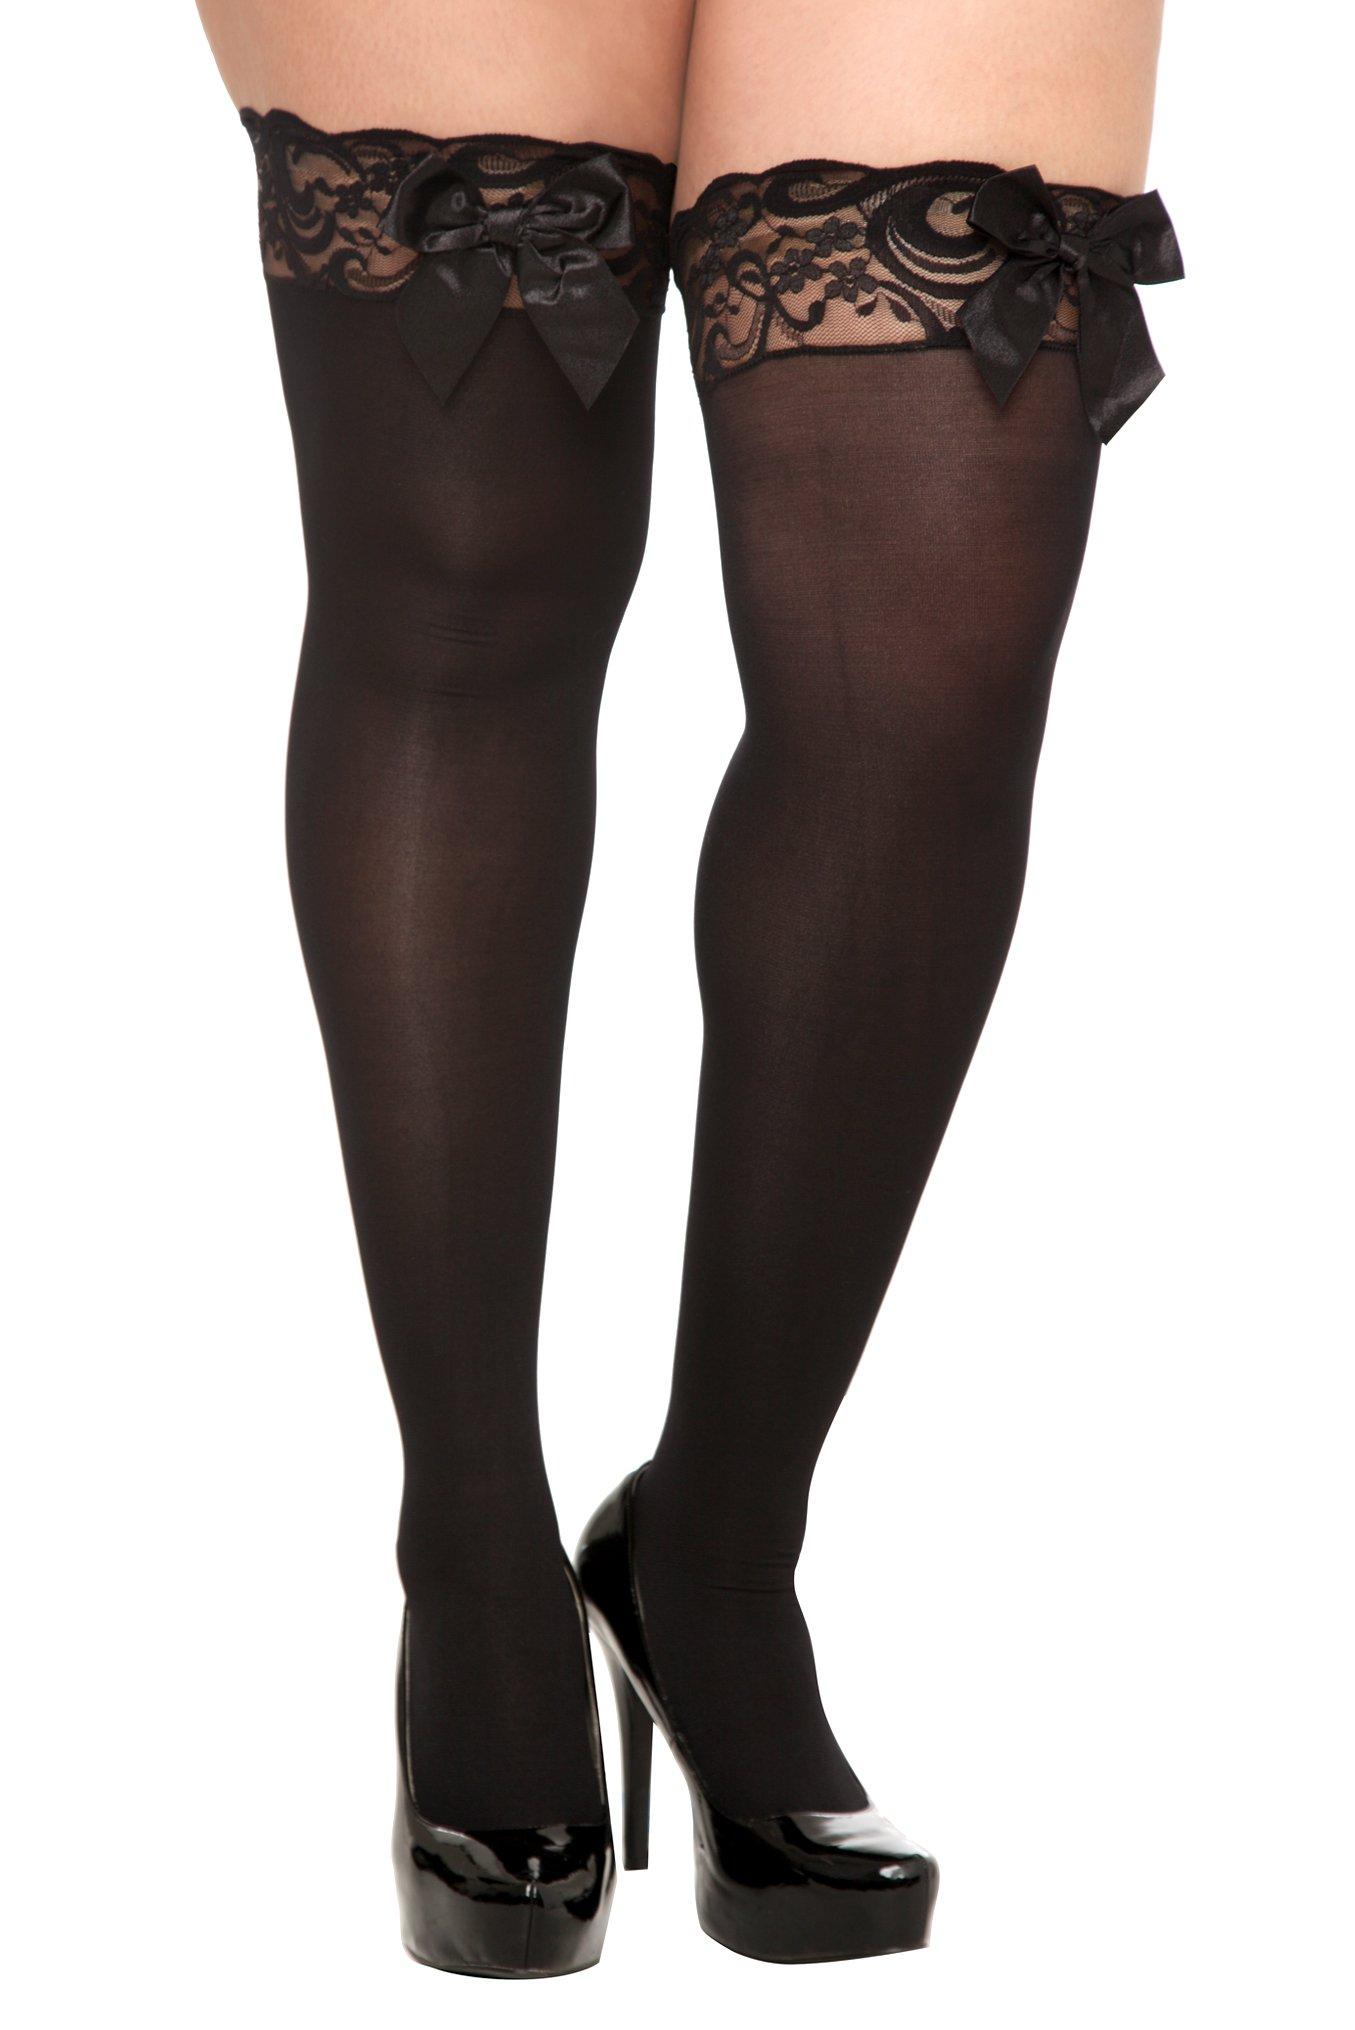 Burlesque striped tights, Buy Sexy hosiery online